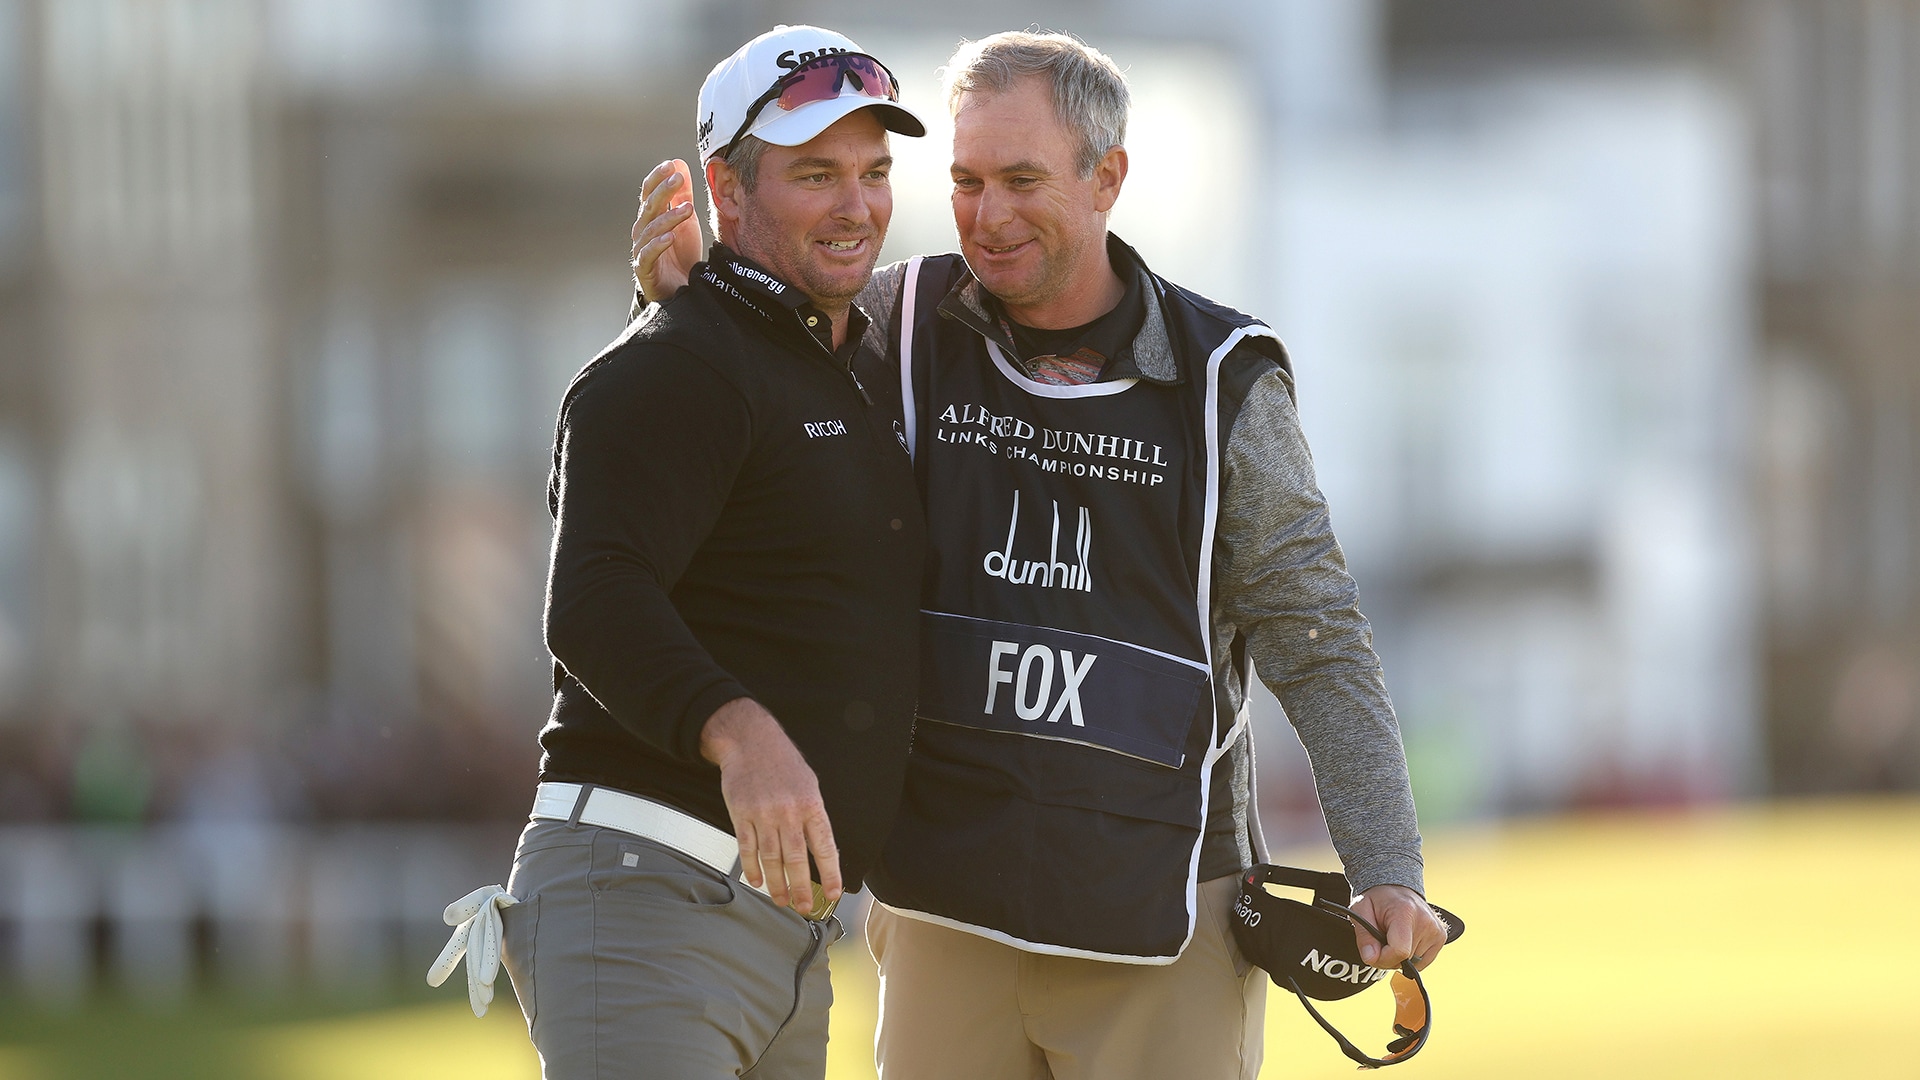 With help from above, Ryan Fox wins Dunhill Links for Warnie